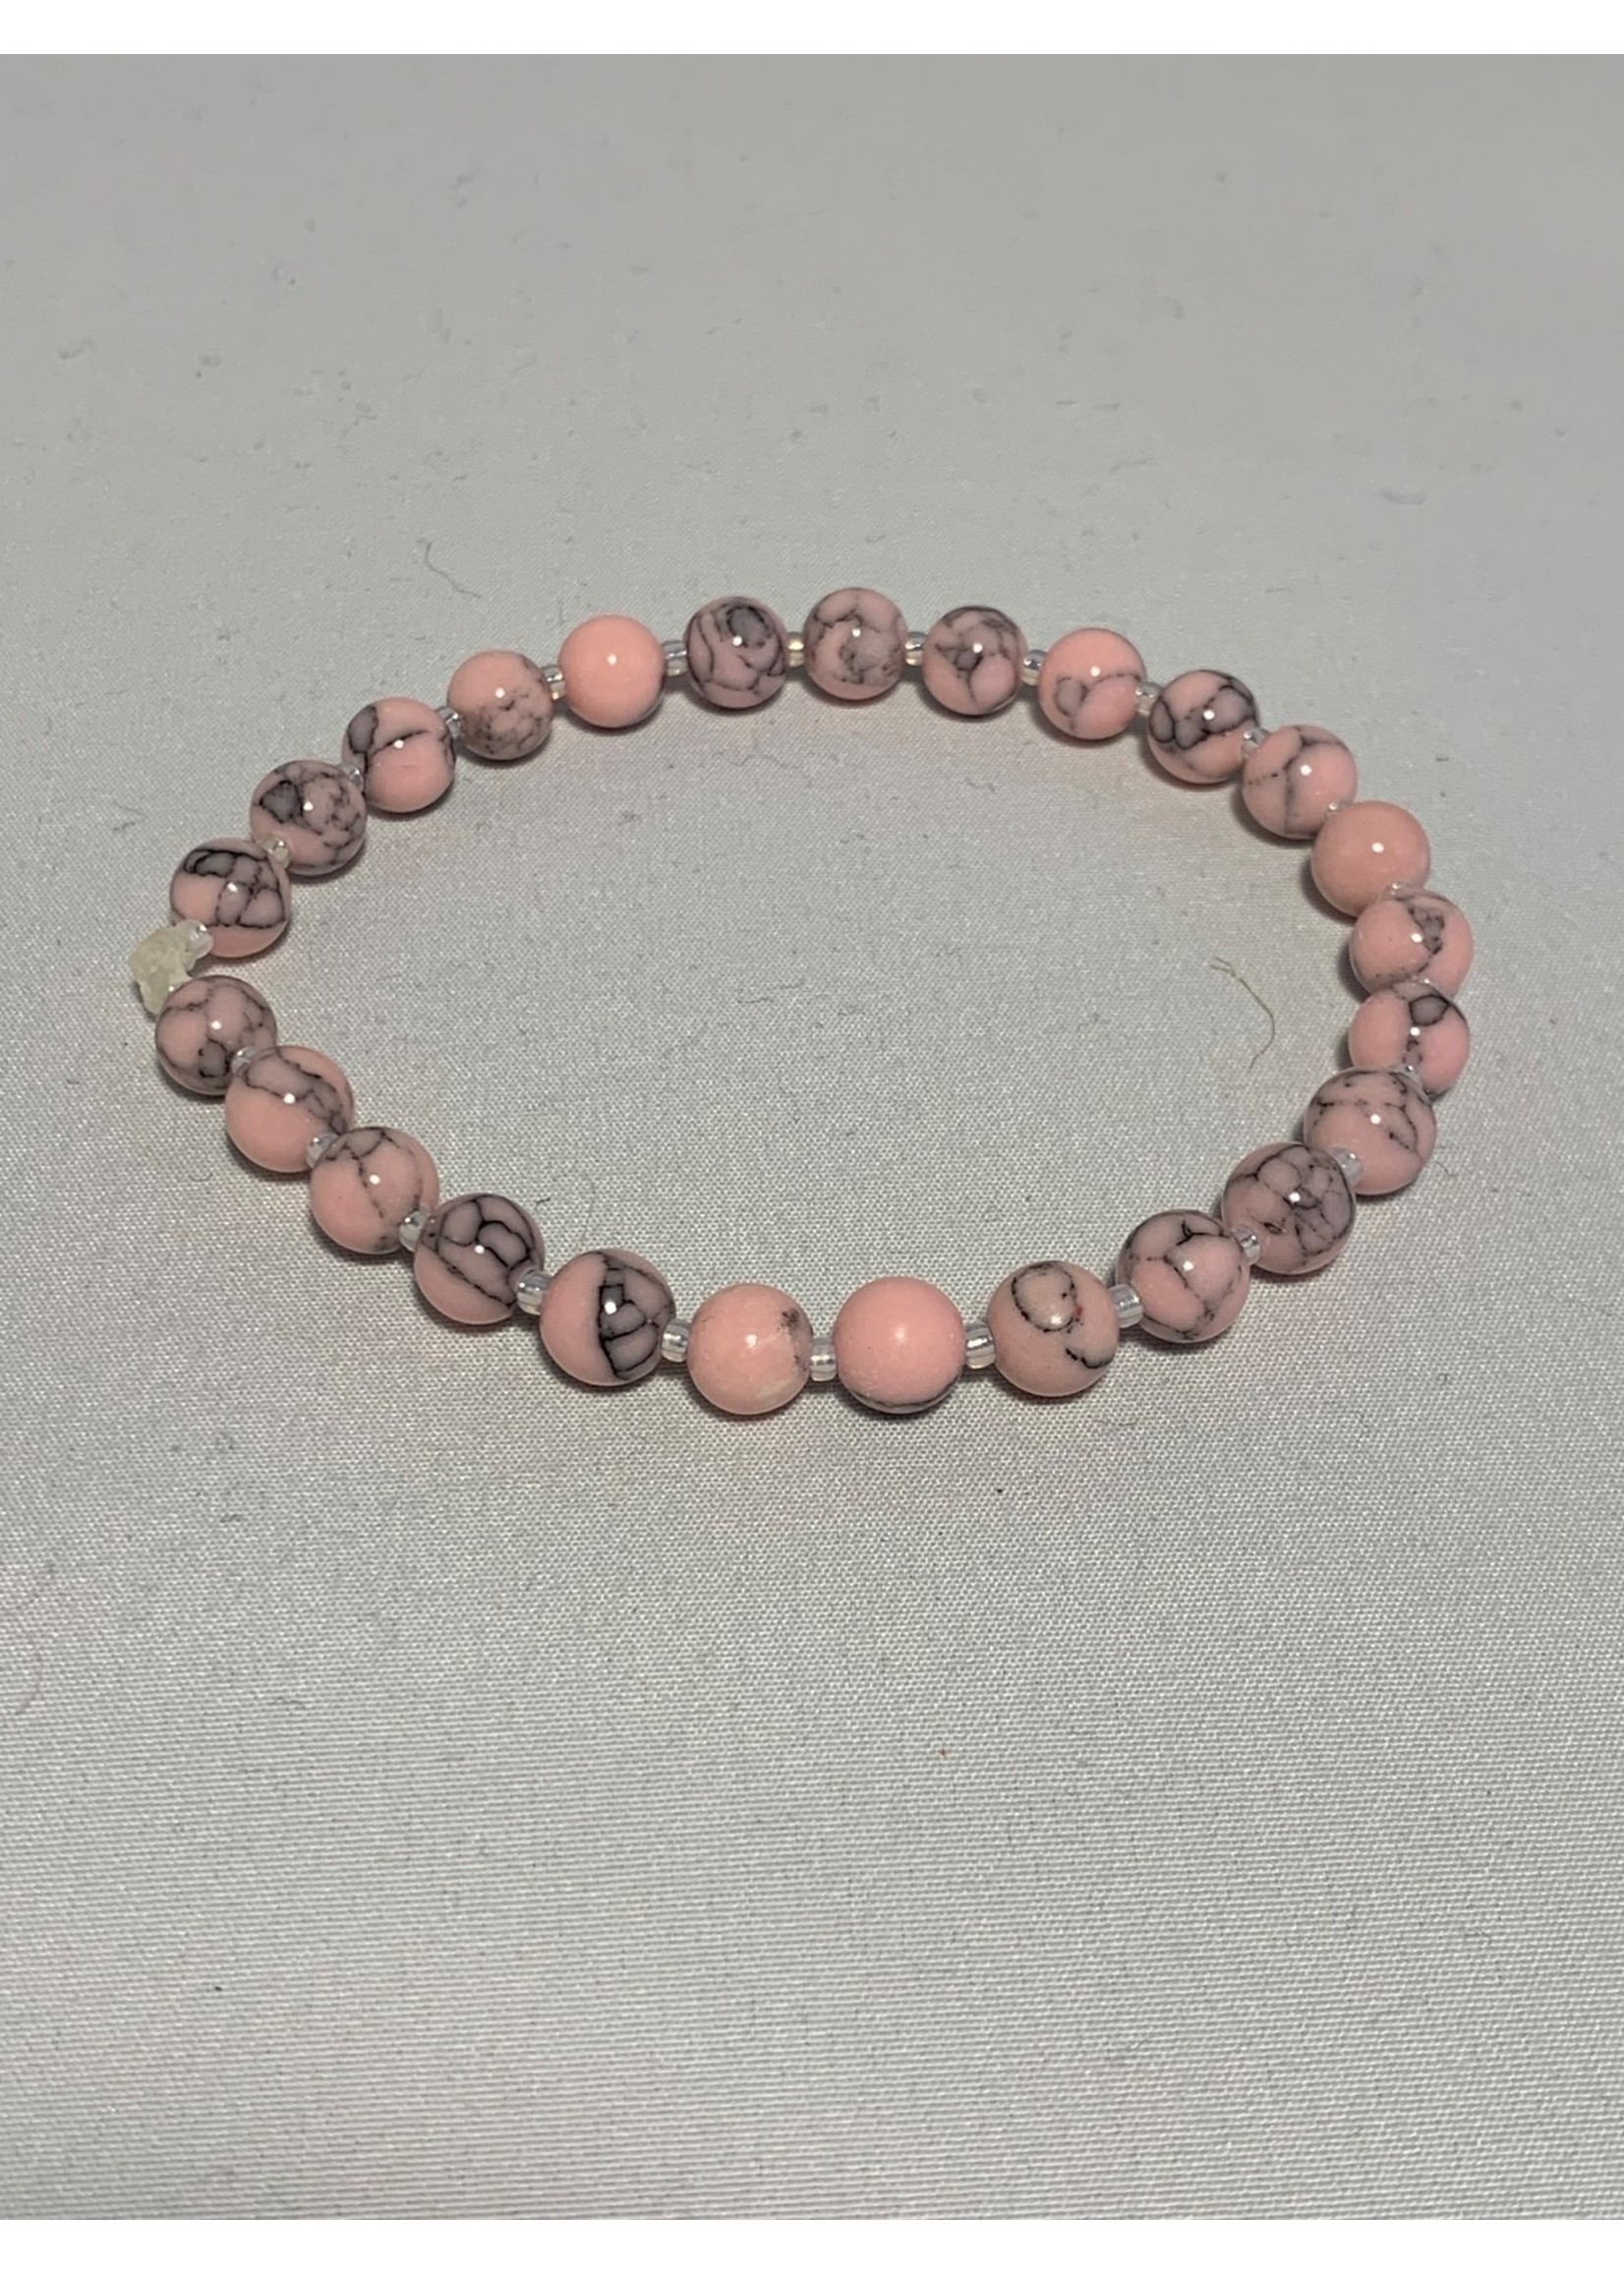 Stretch Bracelet Pink Howlite with Gold Lined Pearl Beads (SOLD)